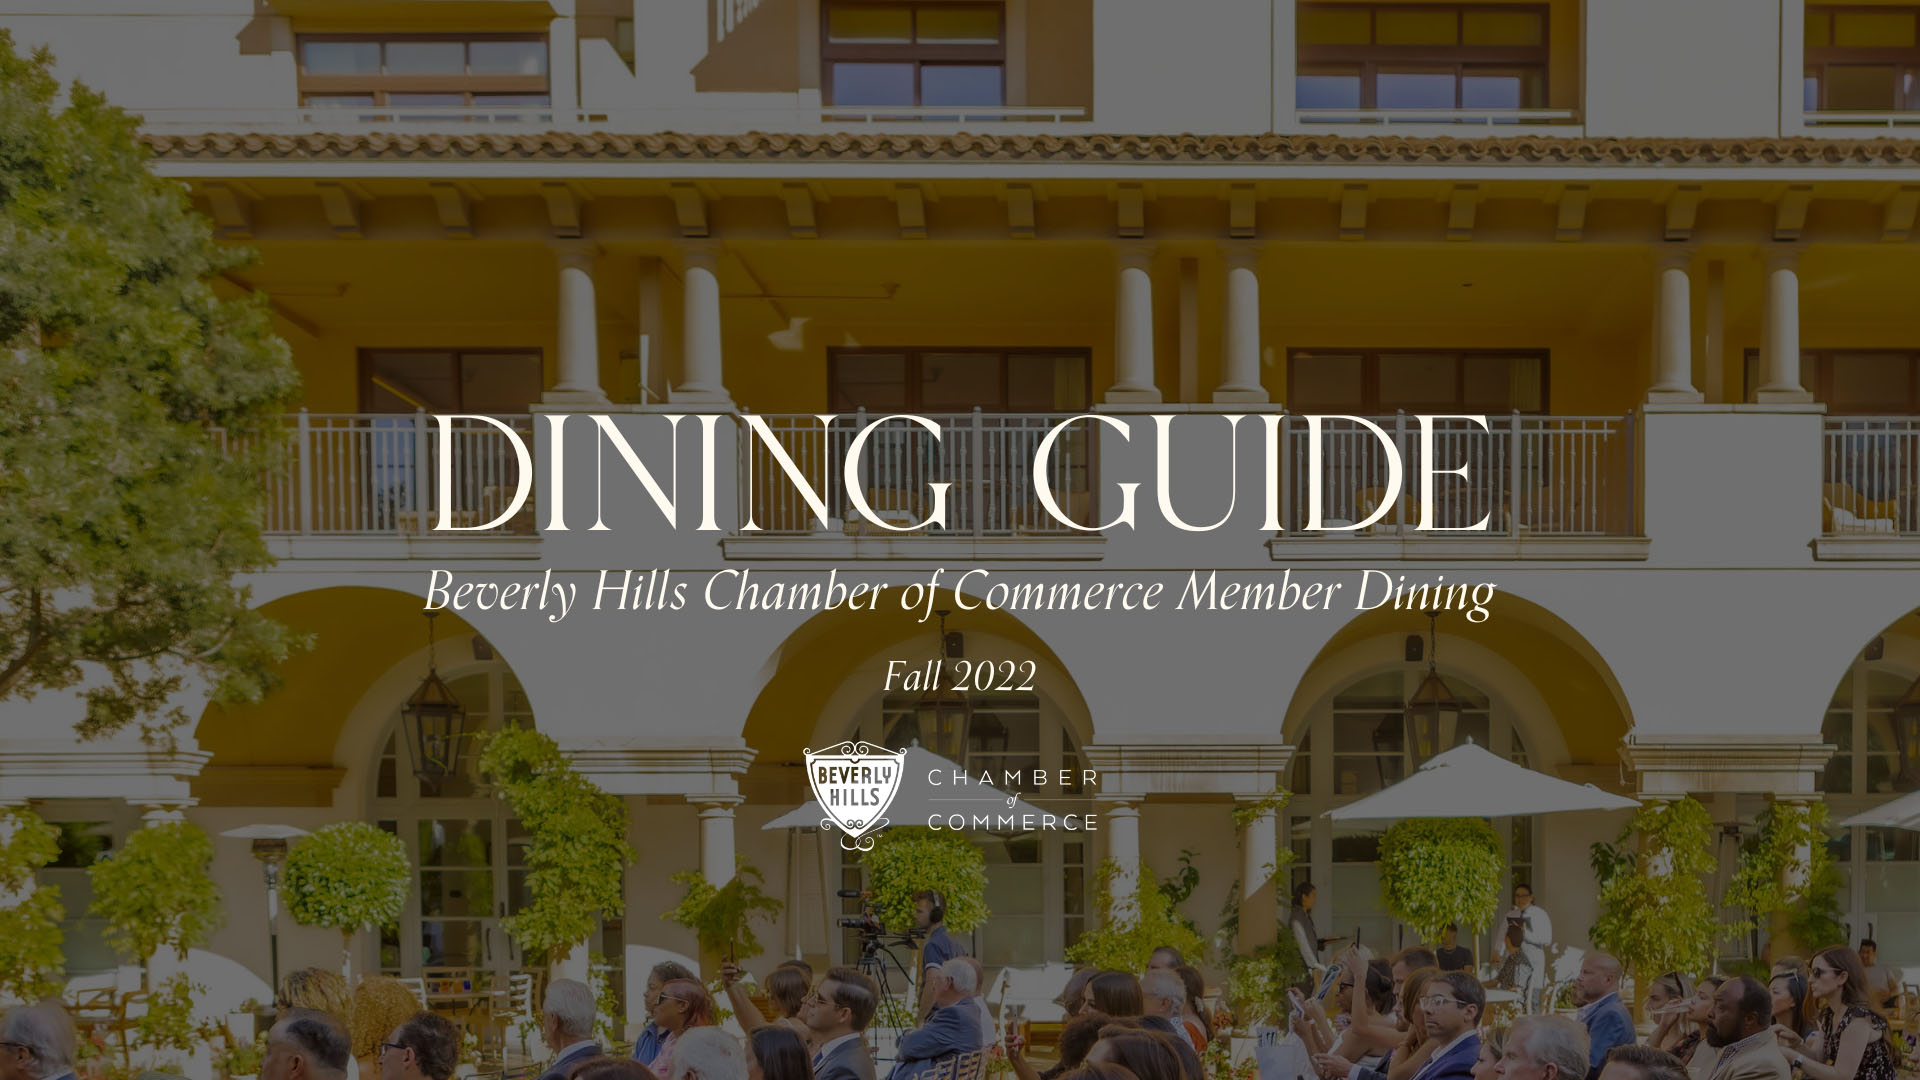 BHCC Dining Guide Fall 2022